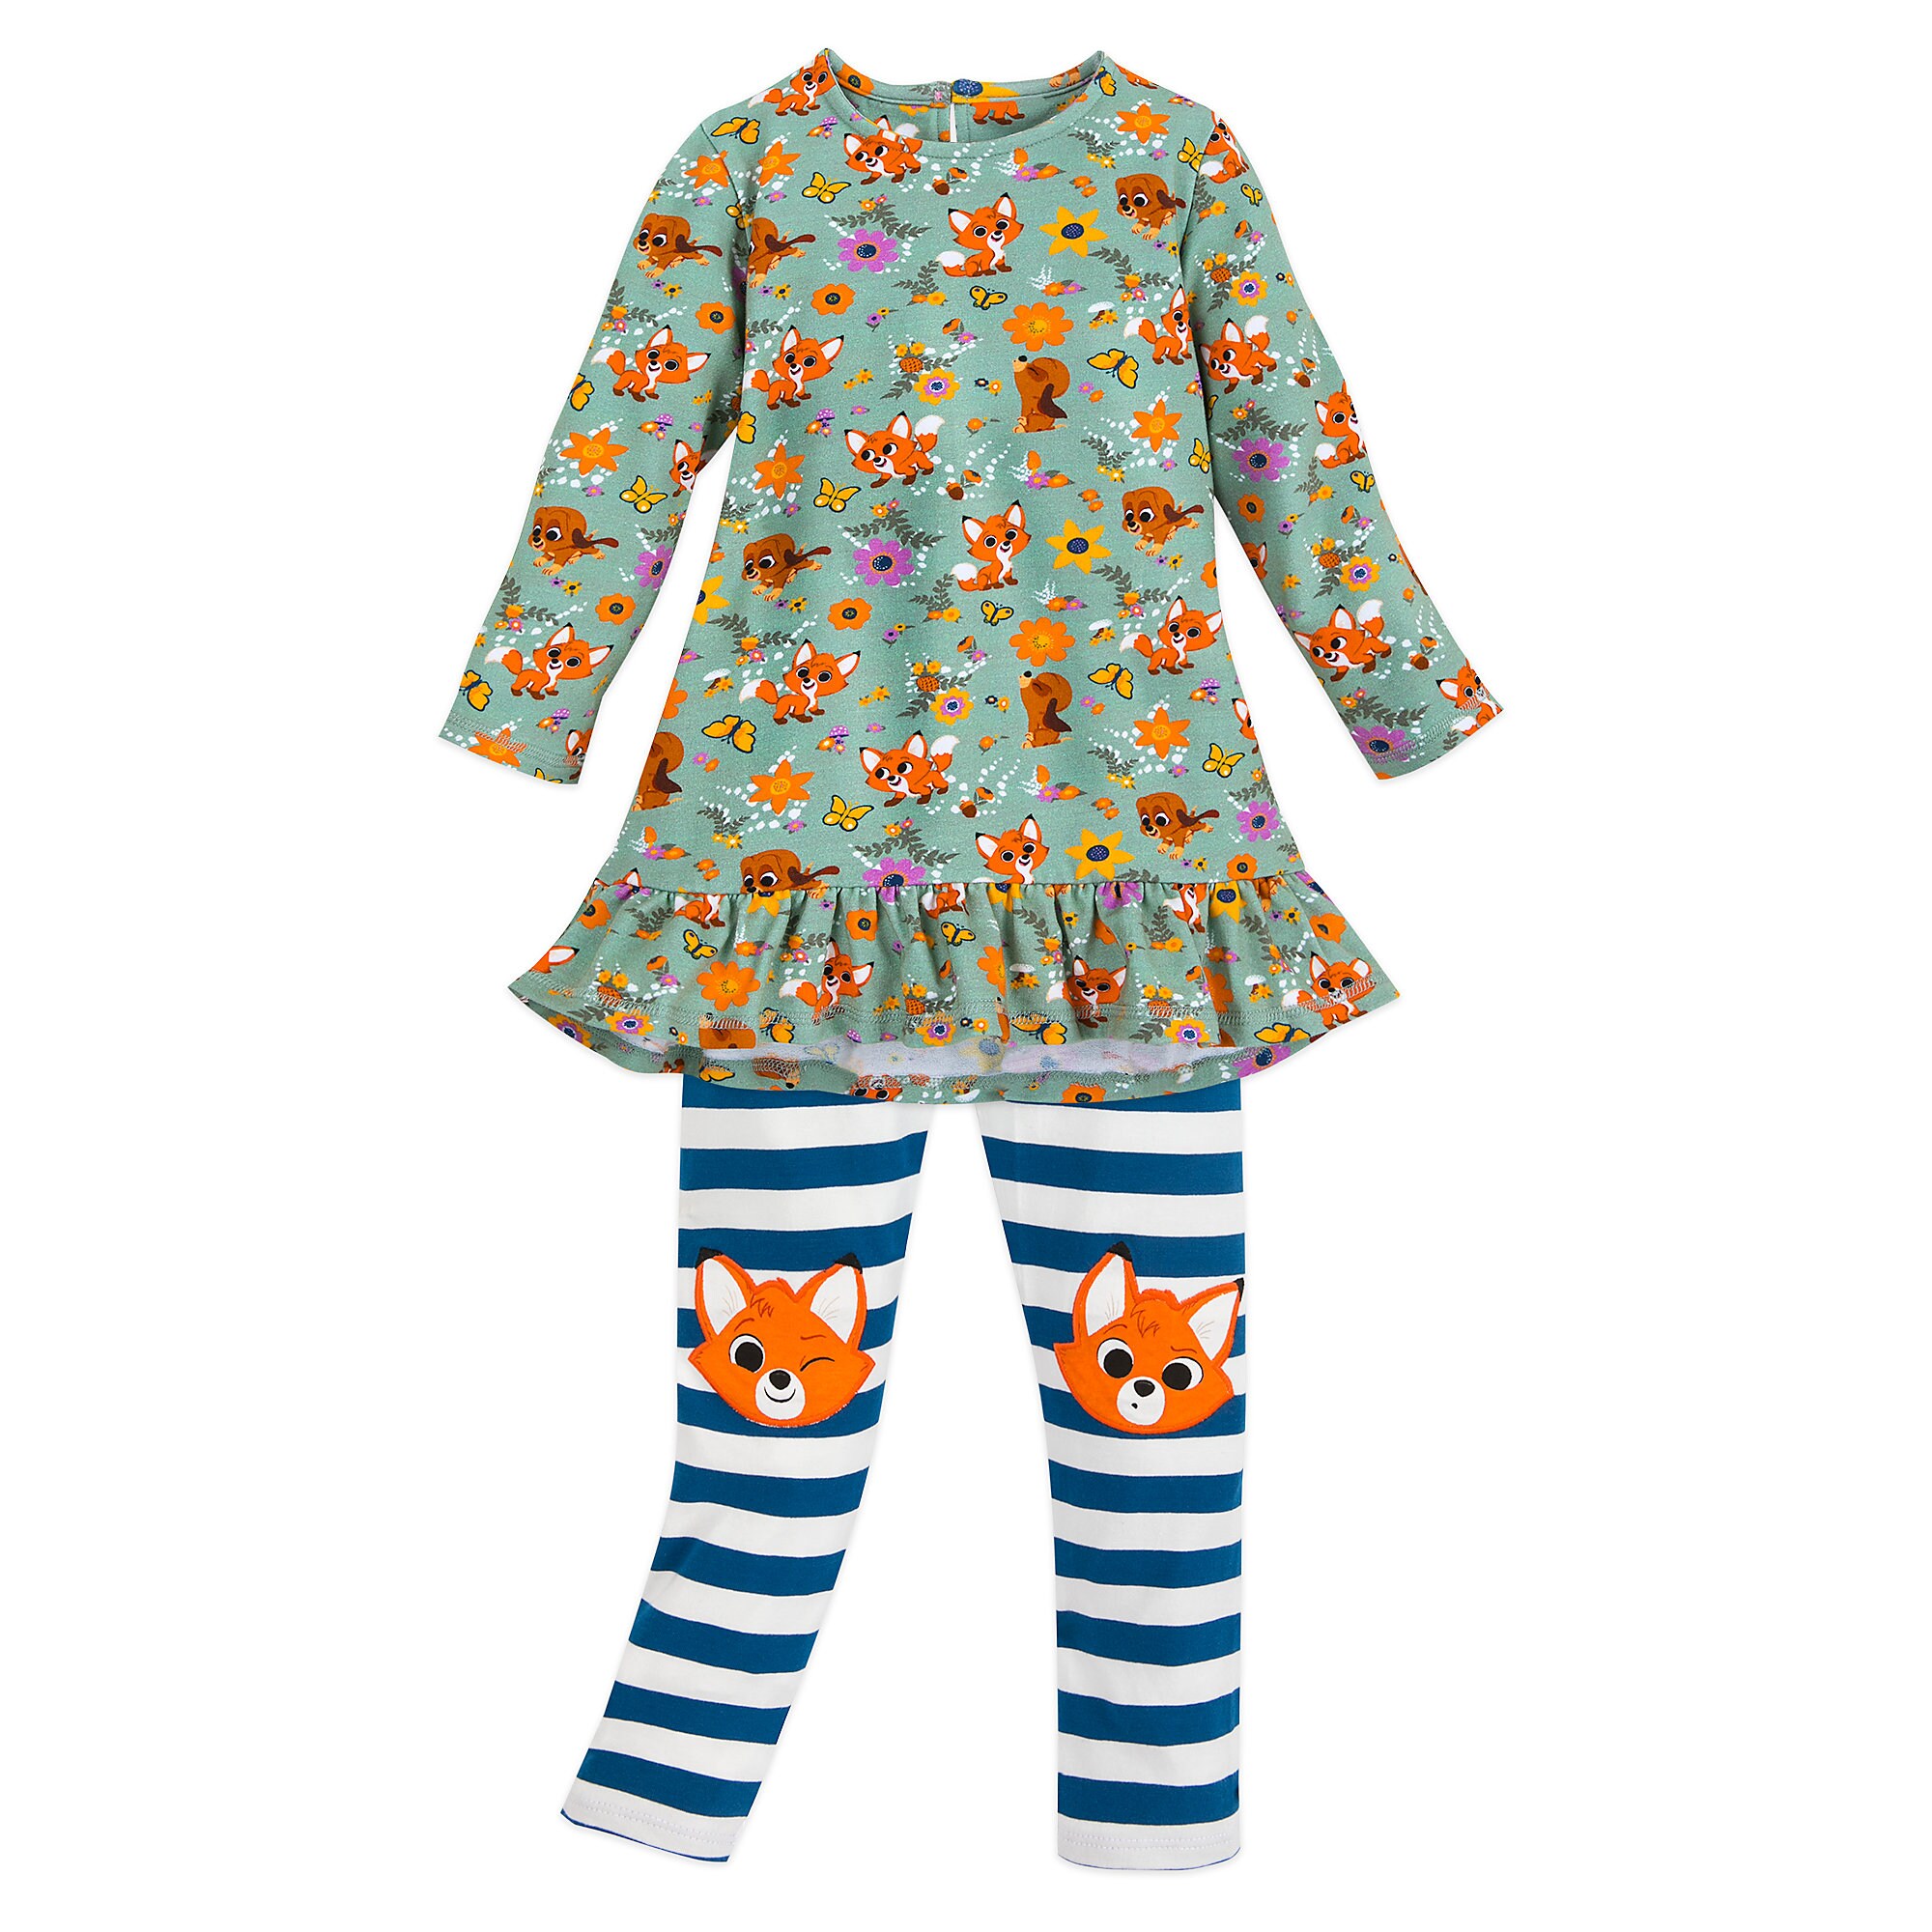 The Fox and the Hound Shirt and Legging Set for Girls - Disney Furrytale friends Collection